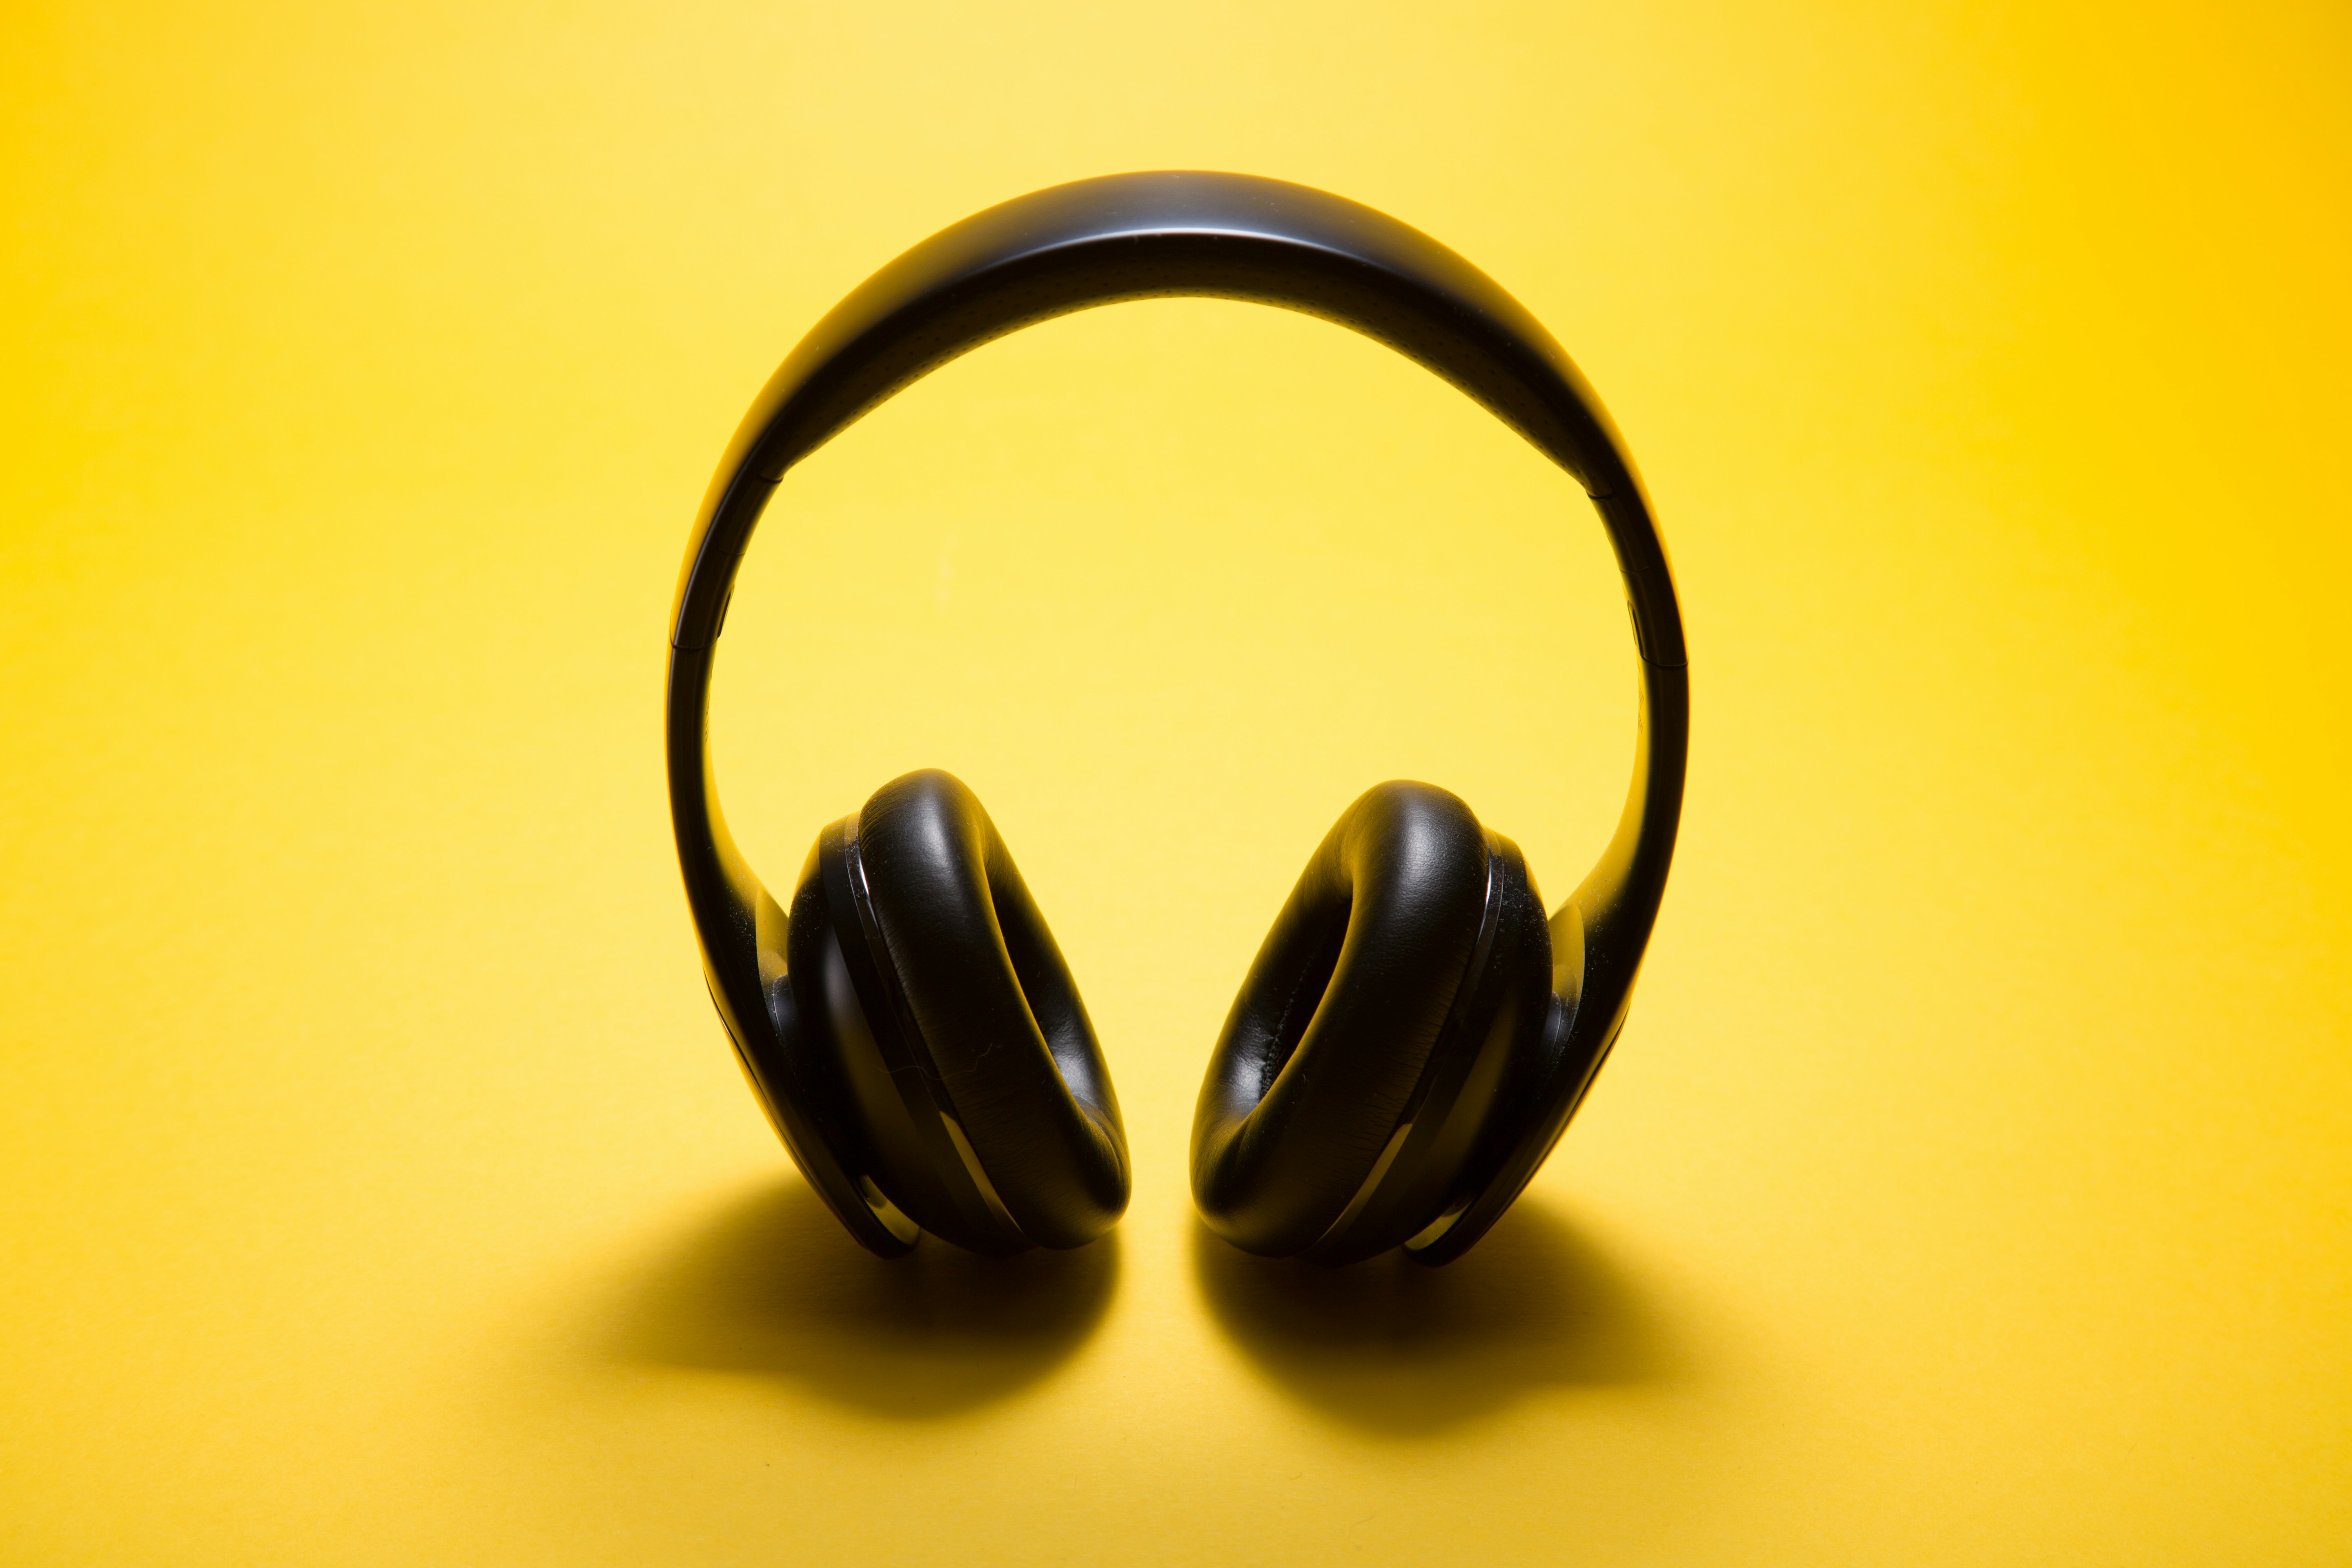 Black headphones over a yellow background